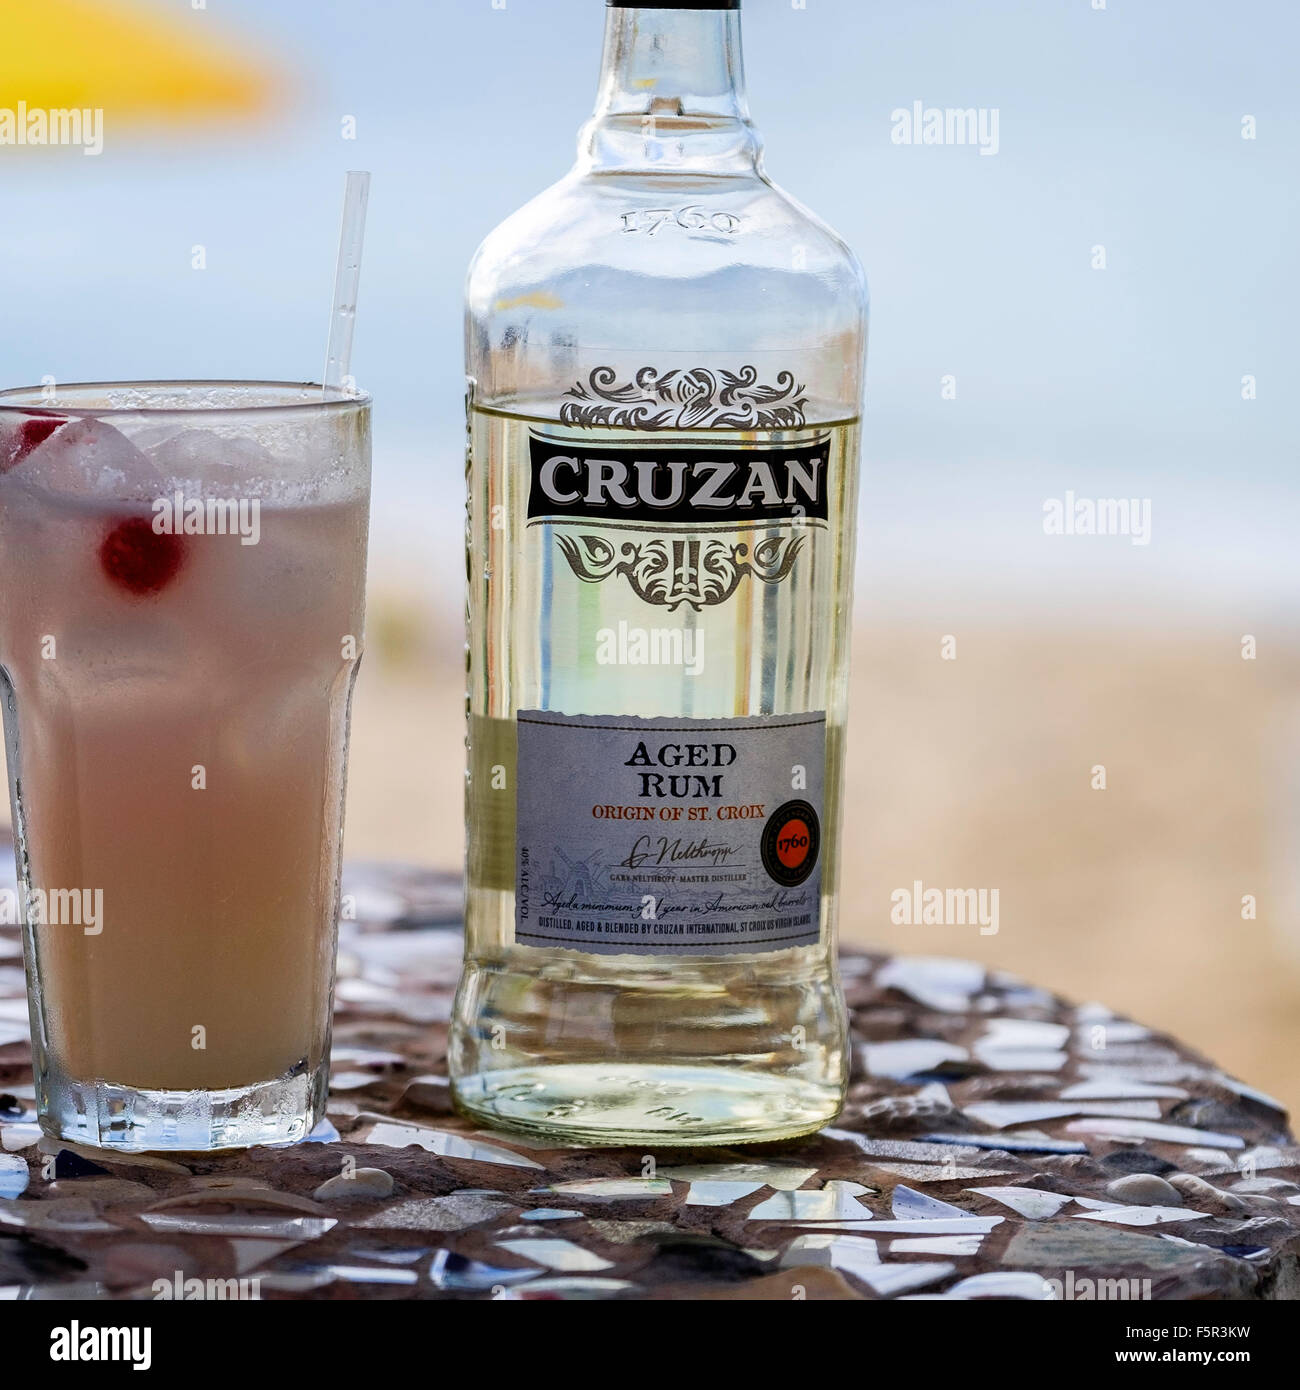 A bottle of Cruzan aged rum and a rum cocktail in a glass sitting on a table with a beach umbrella and Caribbean sea. Stock Photo